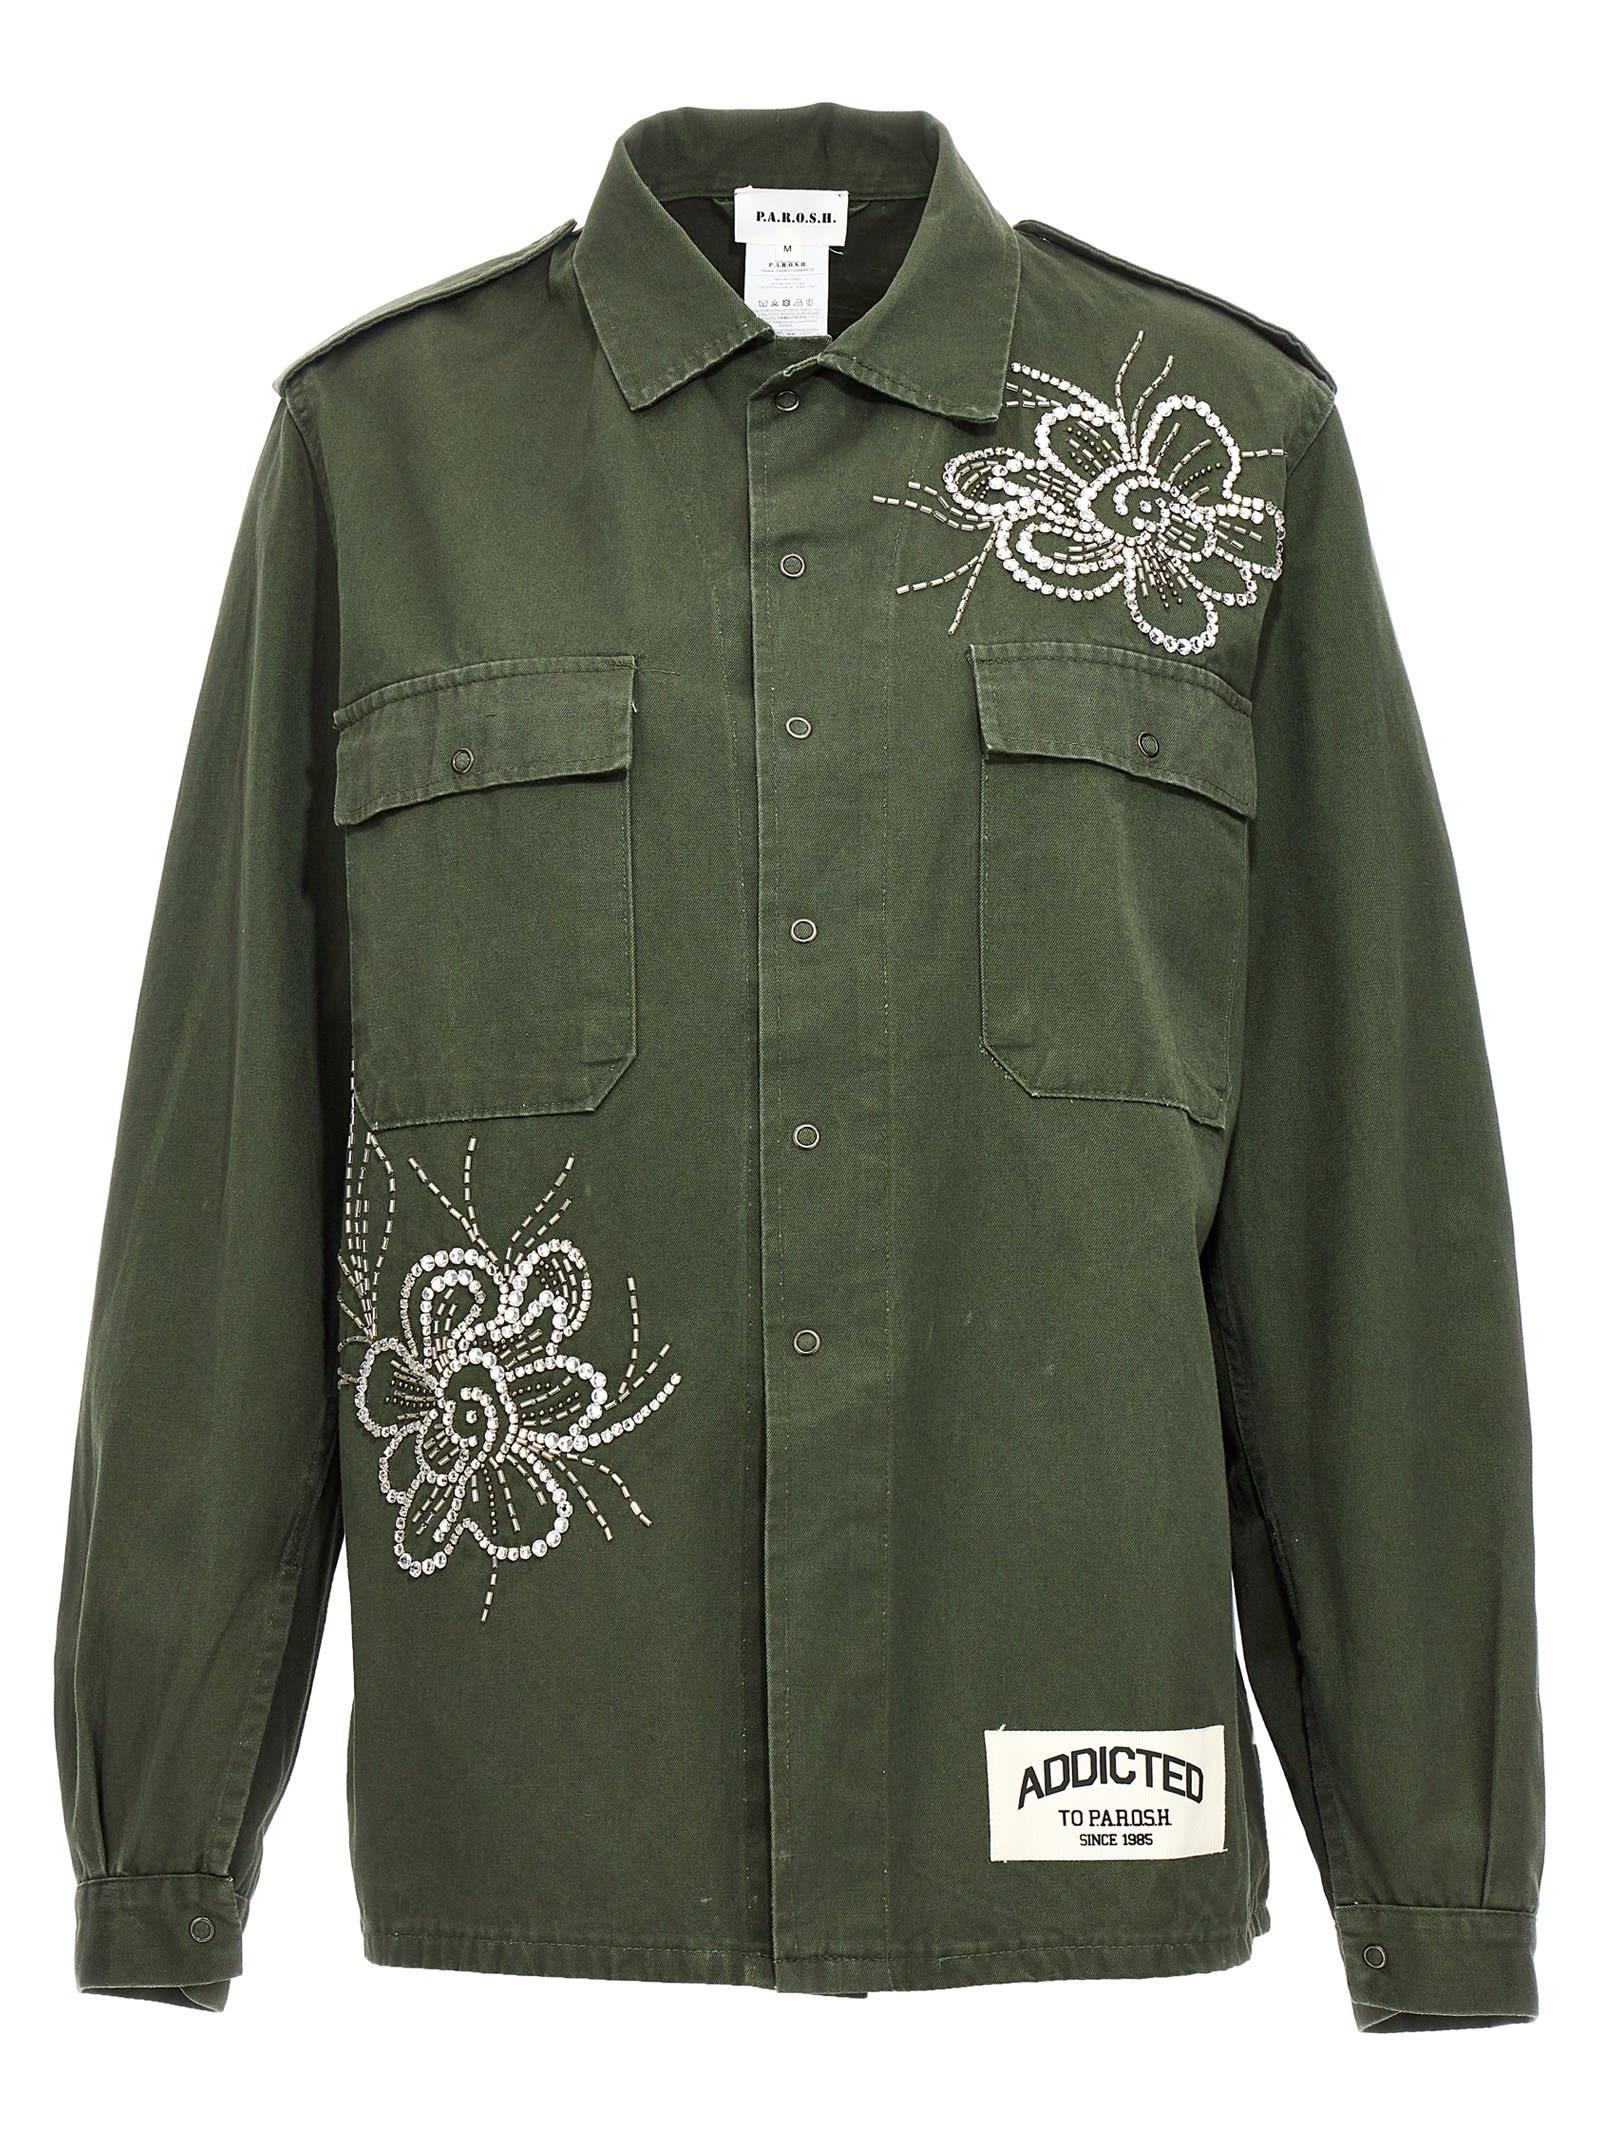 P.A.R.O.S.H. Conquest Jacket in Green | Lyst